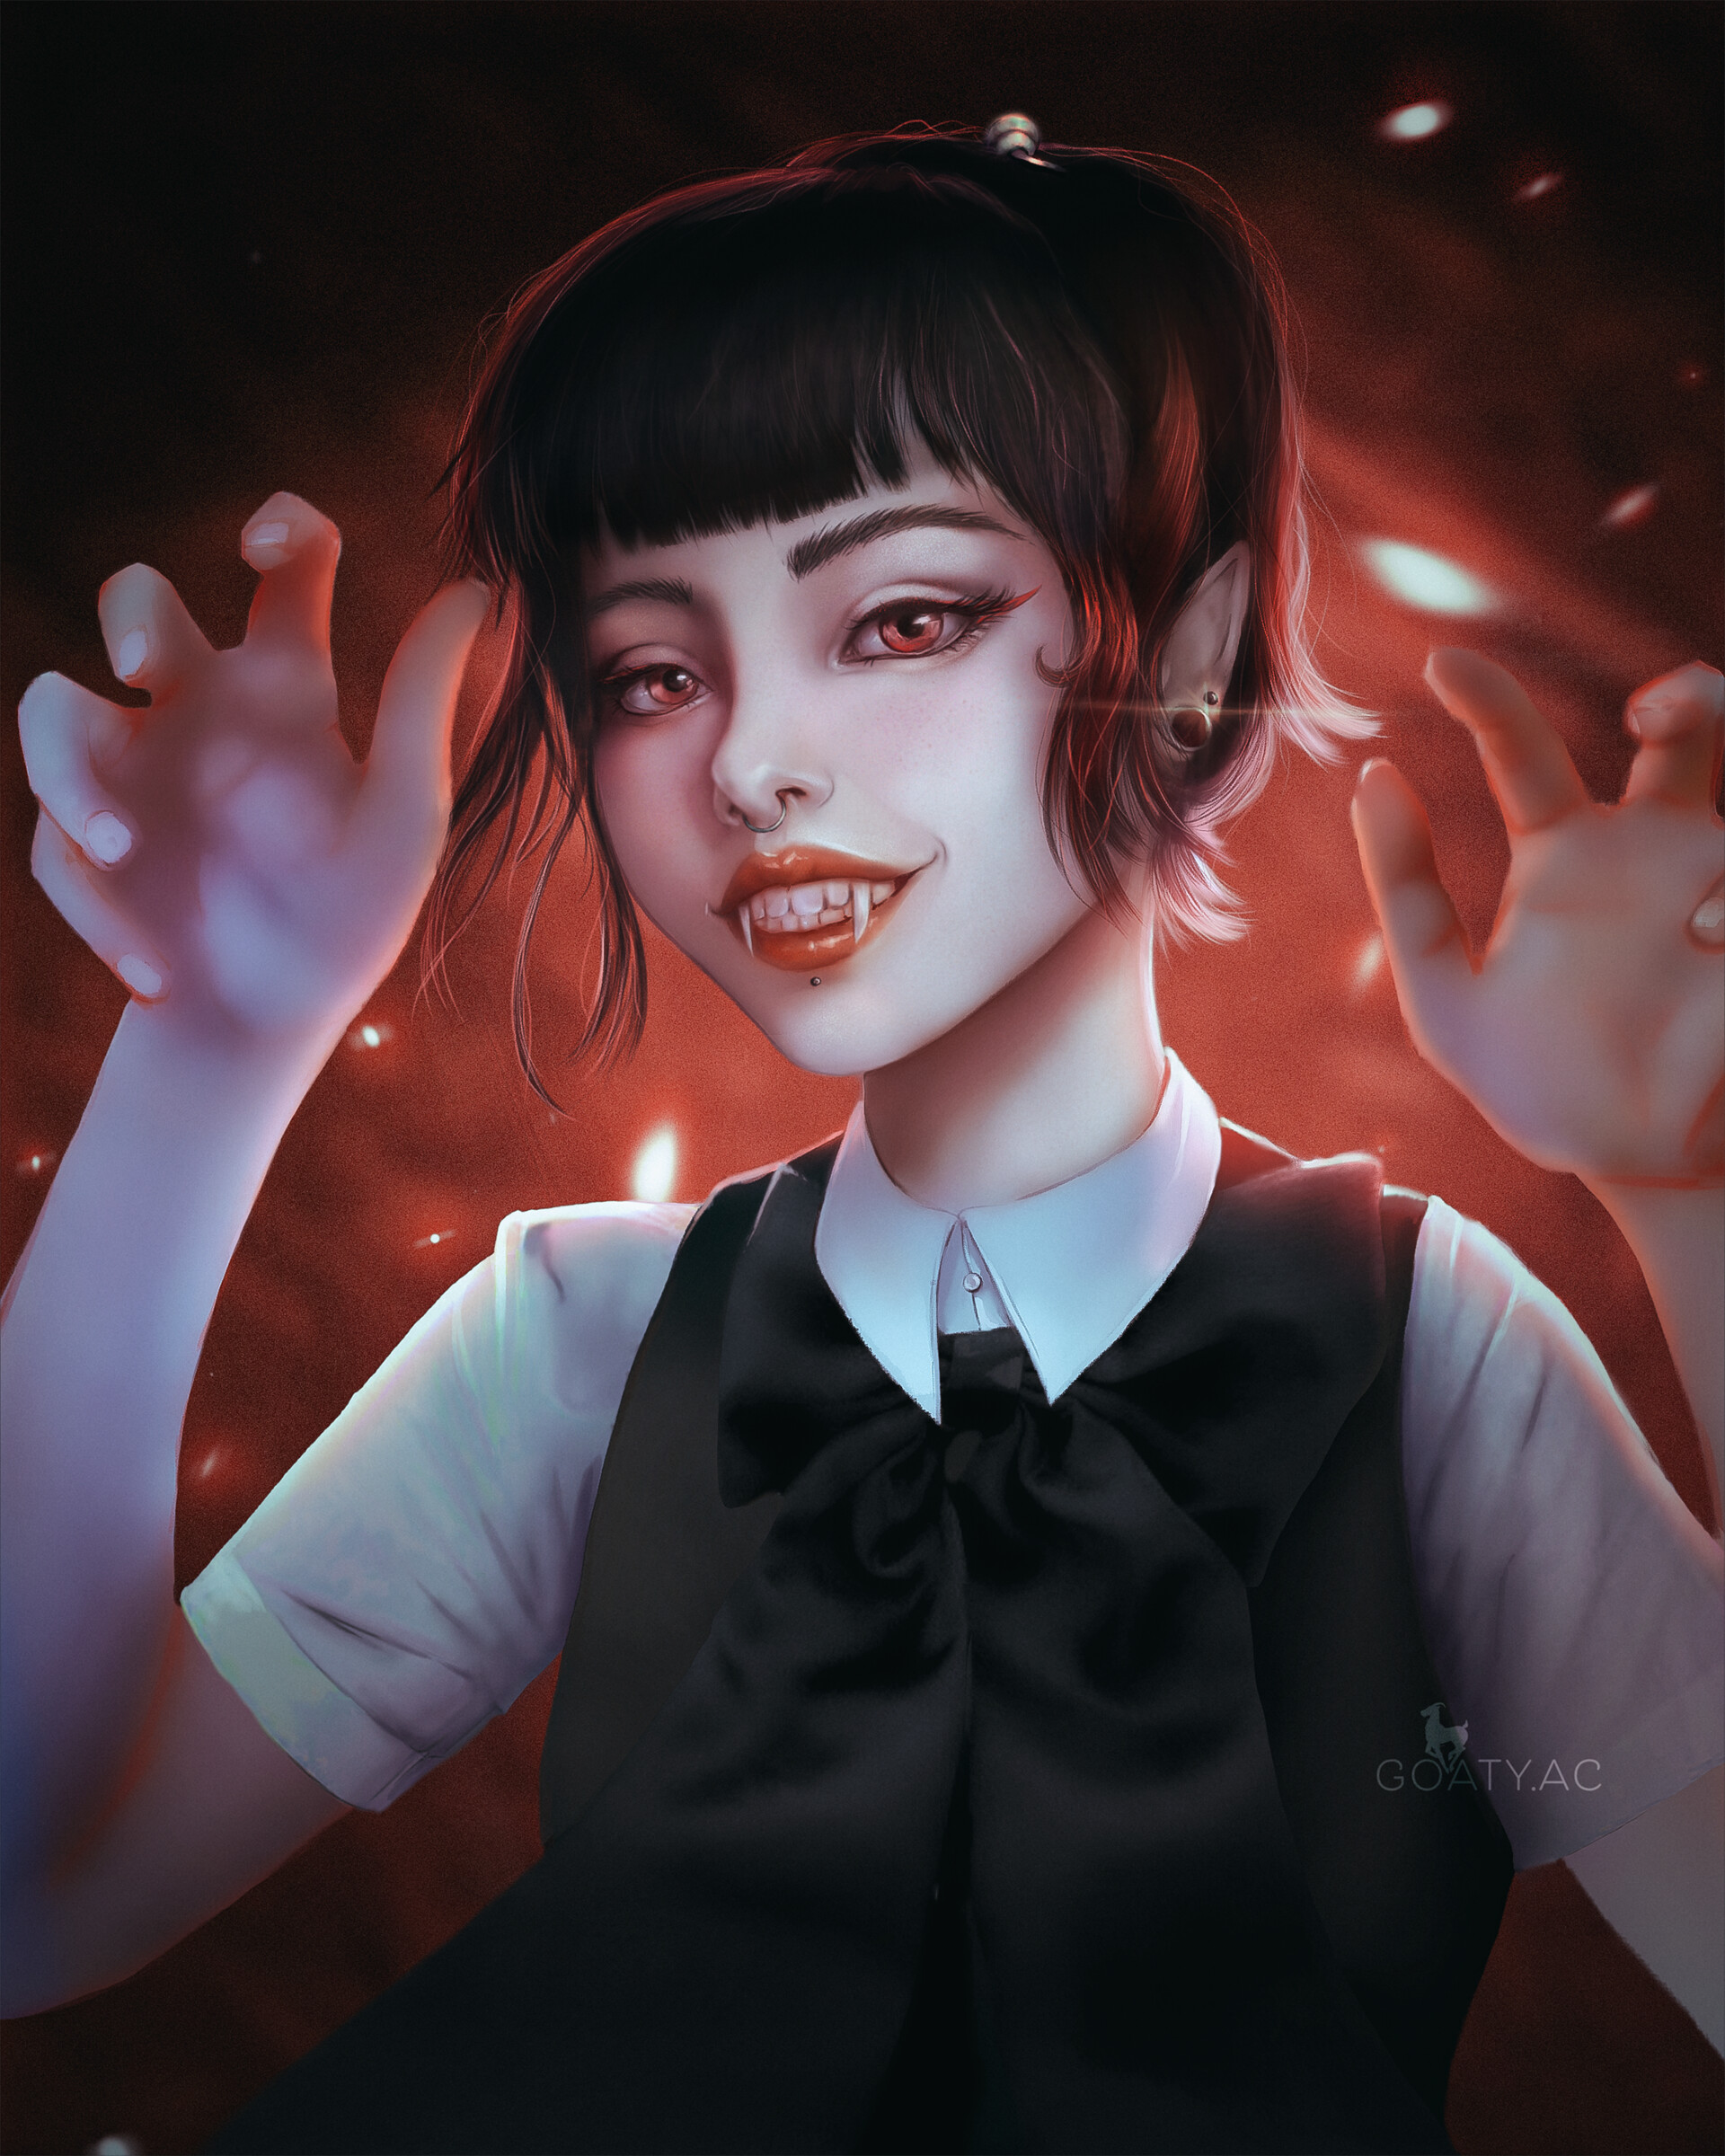 Vampire girl - draw this in your style challenge by Goaty AC at ArtStation